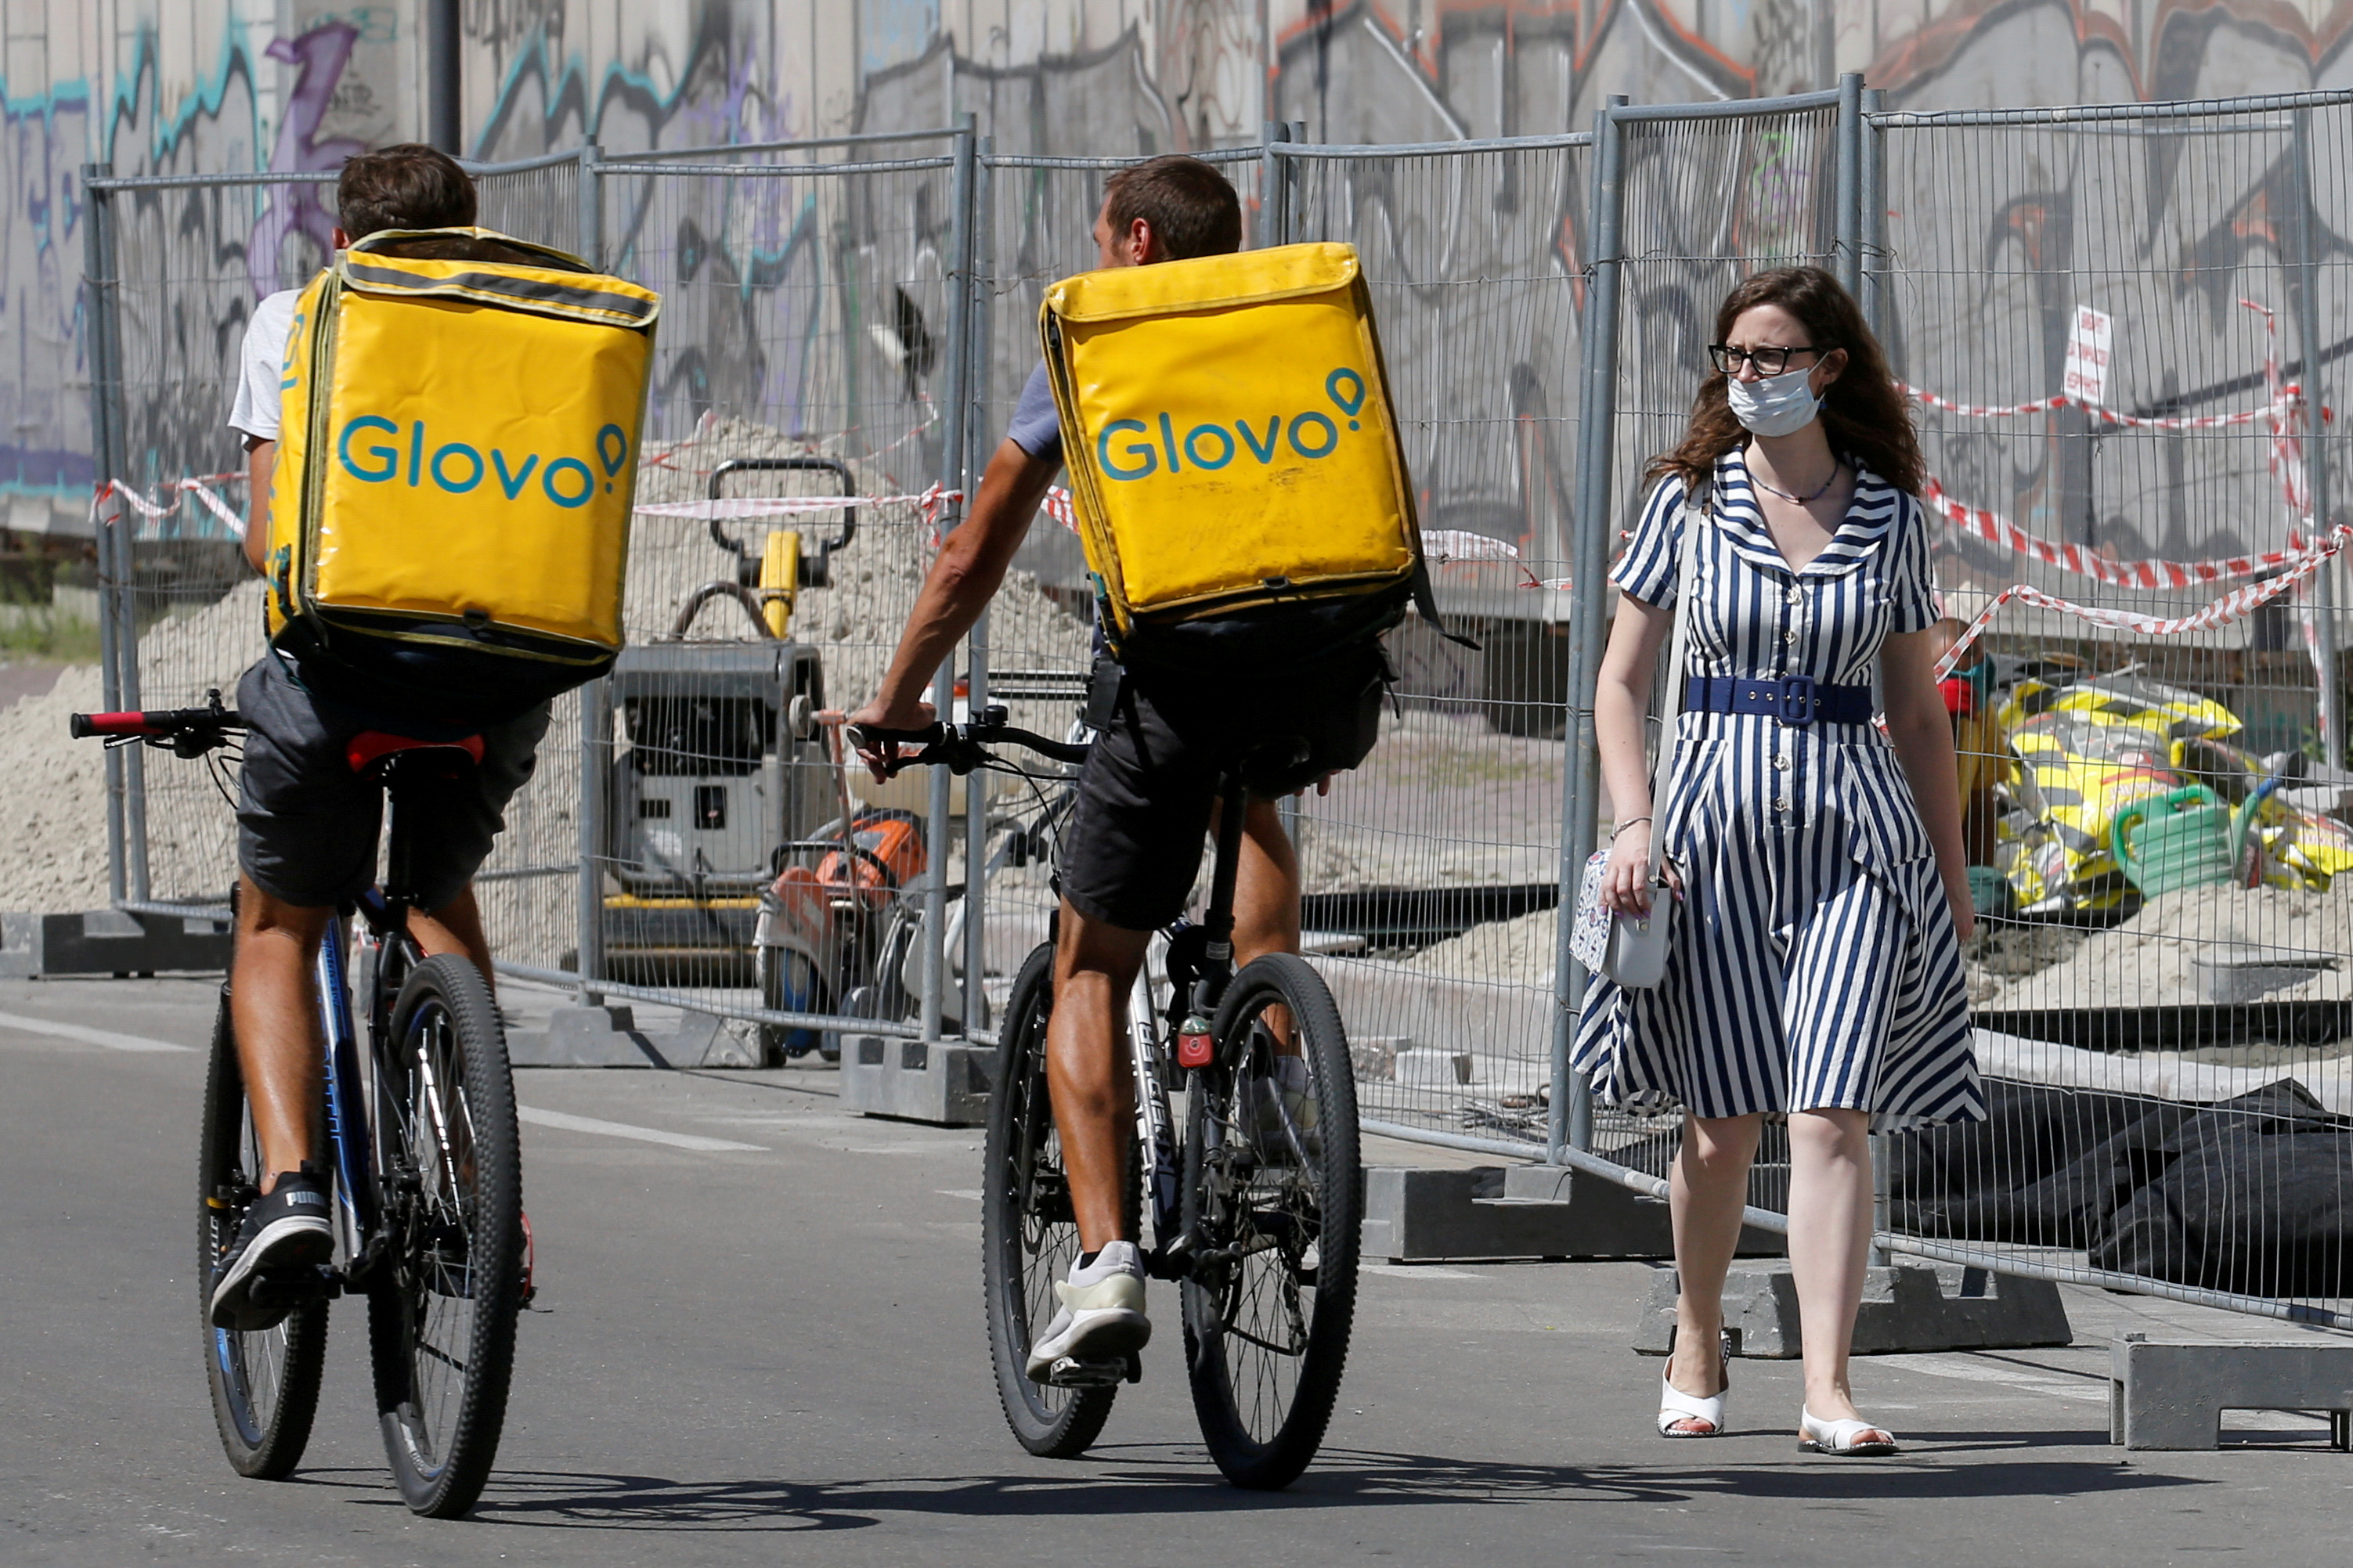 A woman walks past Glovo food delivery couriers in Kyiv